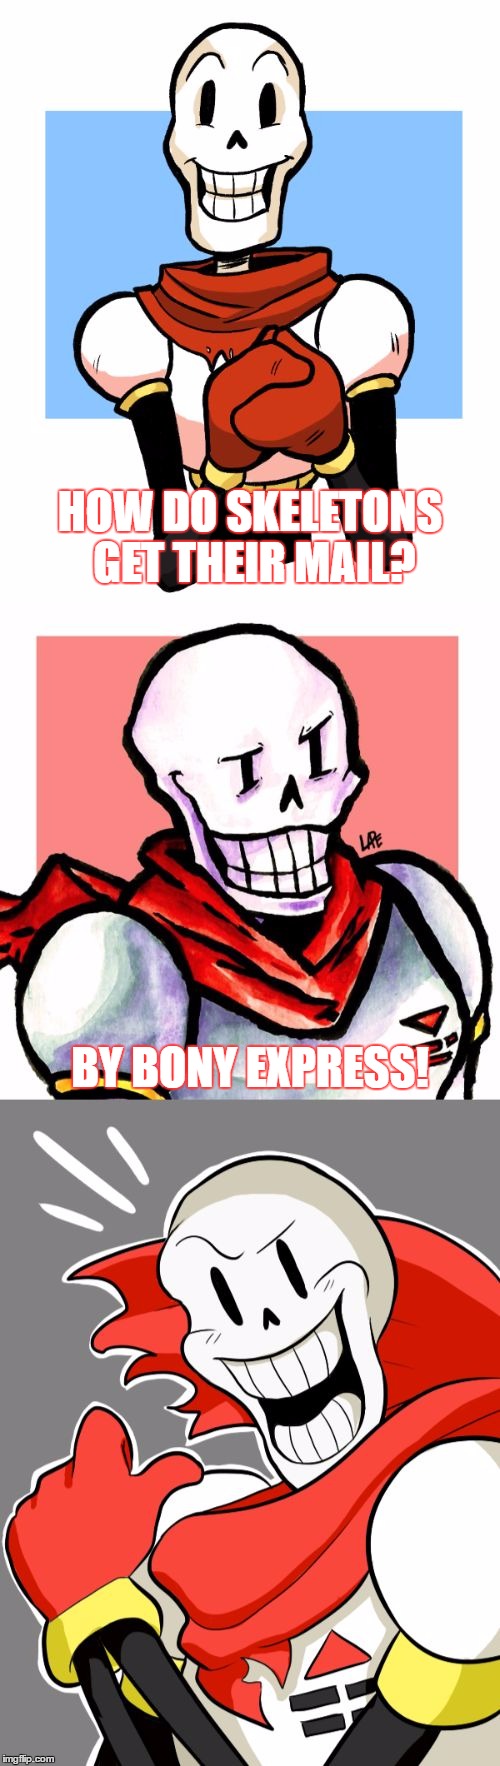 Bad Pun Papyrus | HOW DO SKELETONS GET THEIR MAIL? BY BONY EXPRESS! | image tagged in bad pun papyrus,memes,bad pun,papyrus,funny,undertale | made w/ Imgflip meme maker